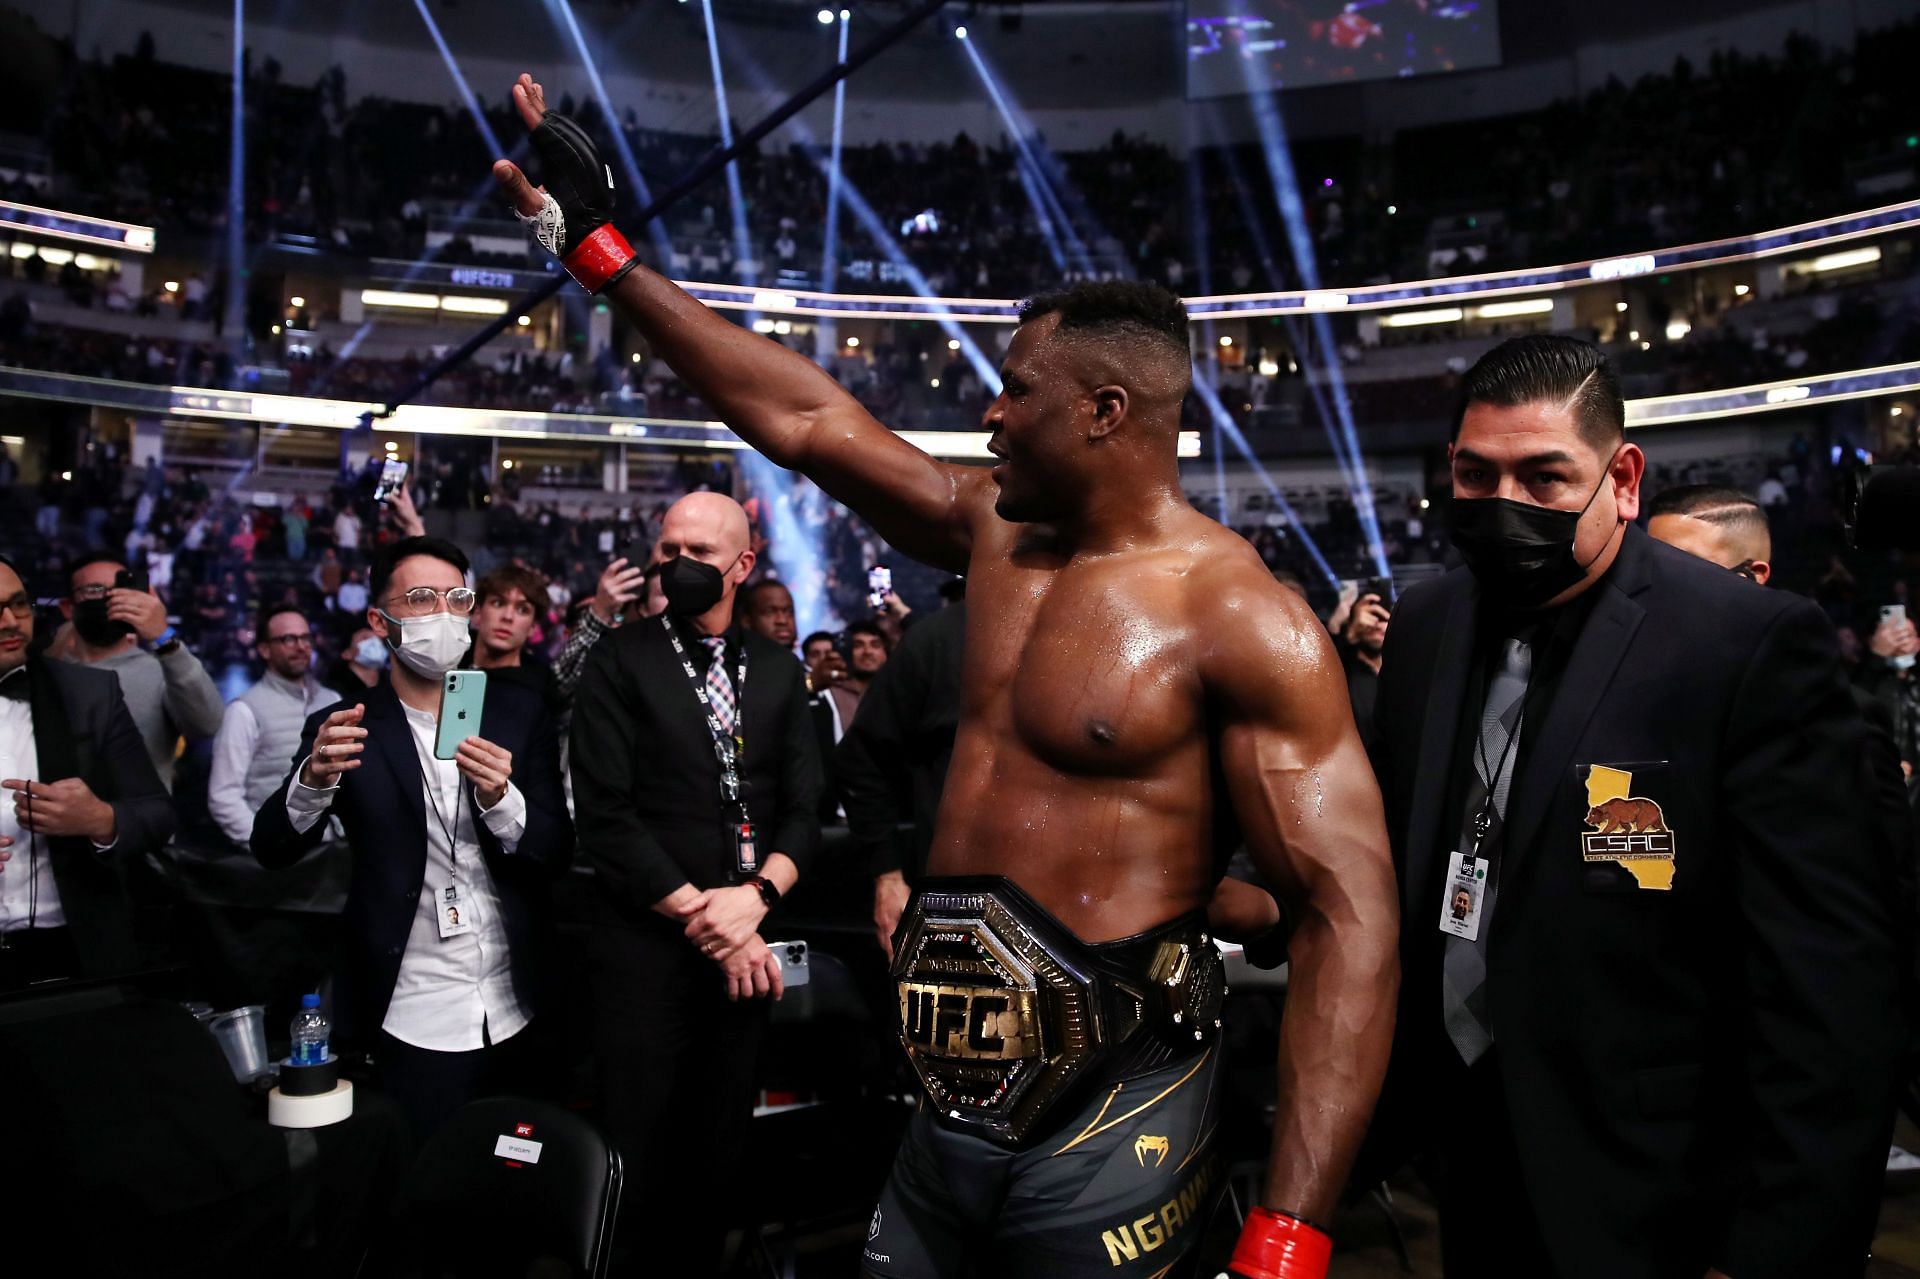 Francis Ngannou leaving the famed octagon at UFC 270 [Image courtesy: Getty images]